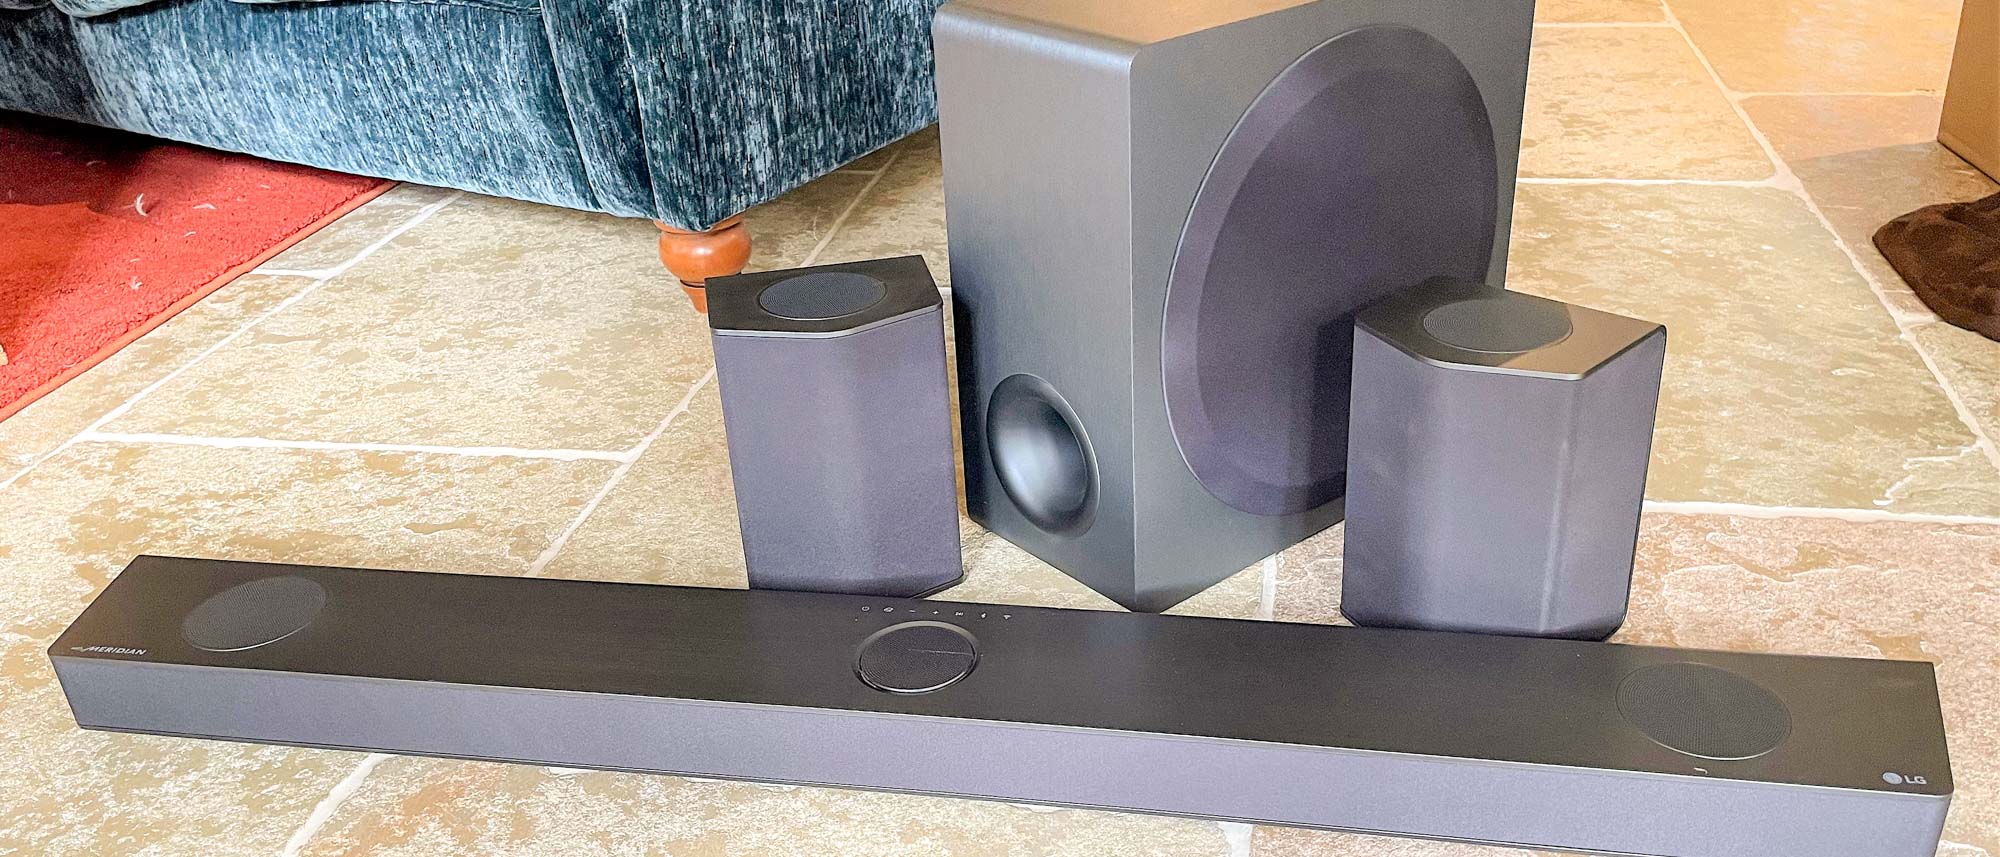 Pebish lettergreep muziek LG S95QR review: a full 9.1.5-channel Dolby Atmos setup in a box | Tom's  Guide